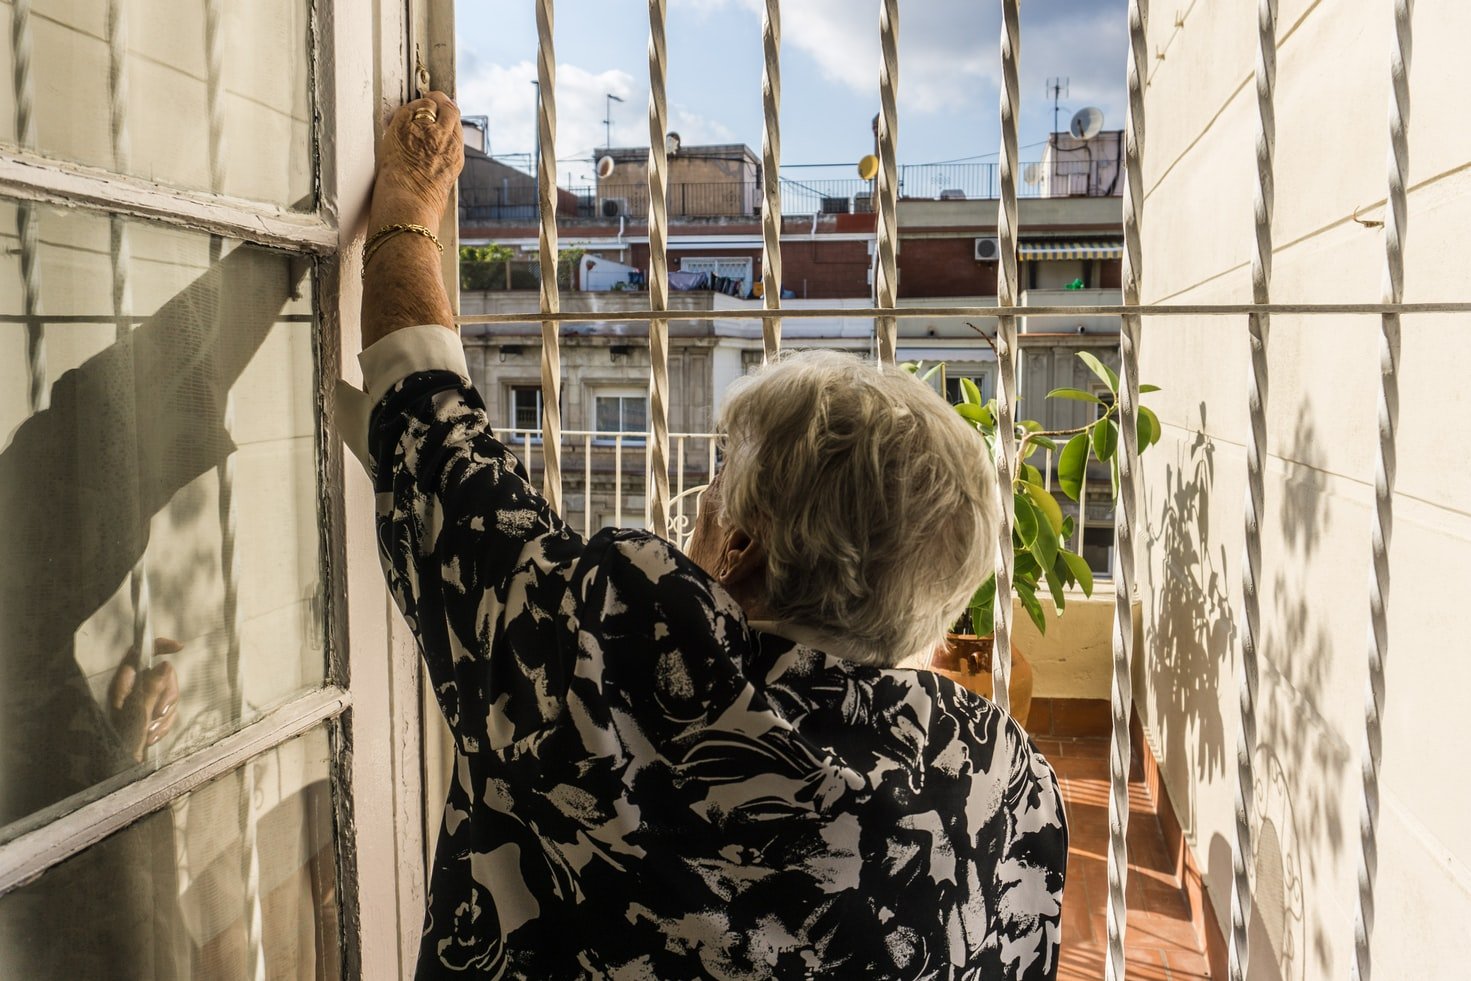 There was an old woman waiting for Tammy at the door | Source: Unsplash